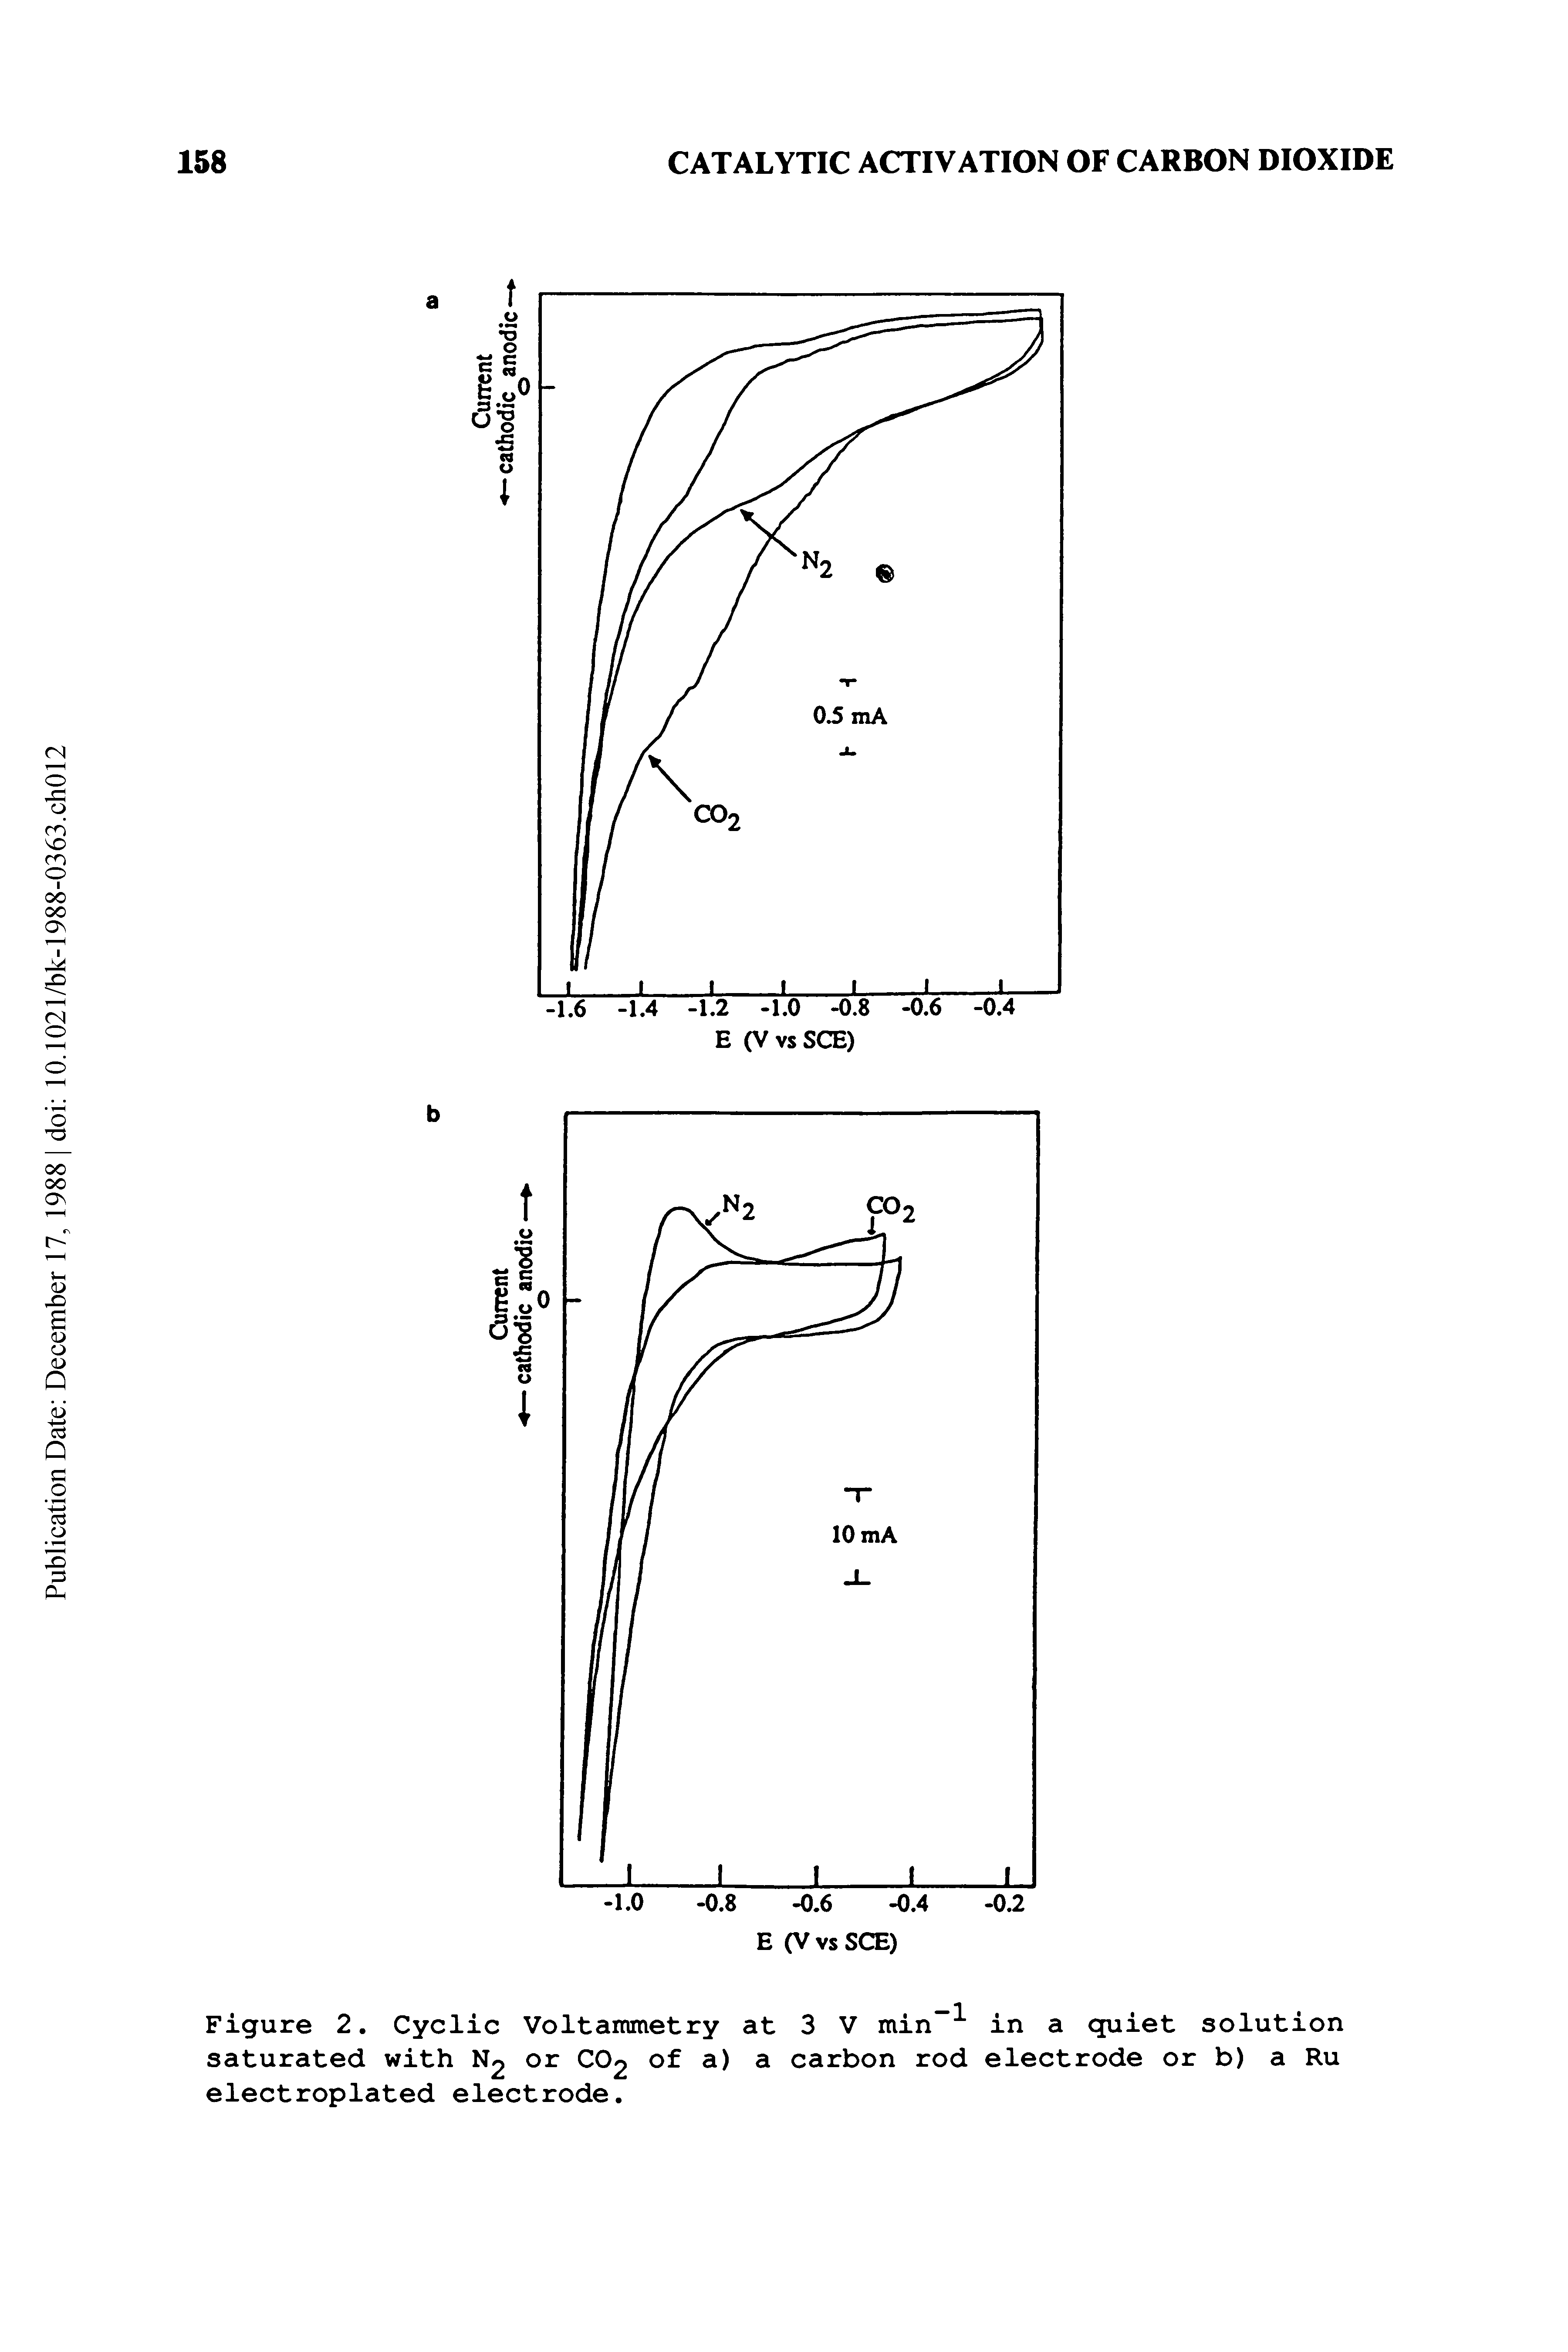 Figure 2. Cyclic Voltammetry at 3 V min in a quiet solution saturated with N2 or CO2 of a) a carbon rod electrode or b) a Ru electroplated electrode.